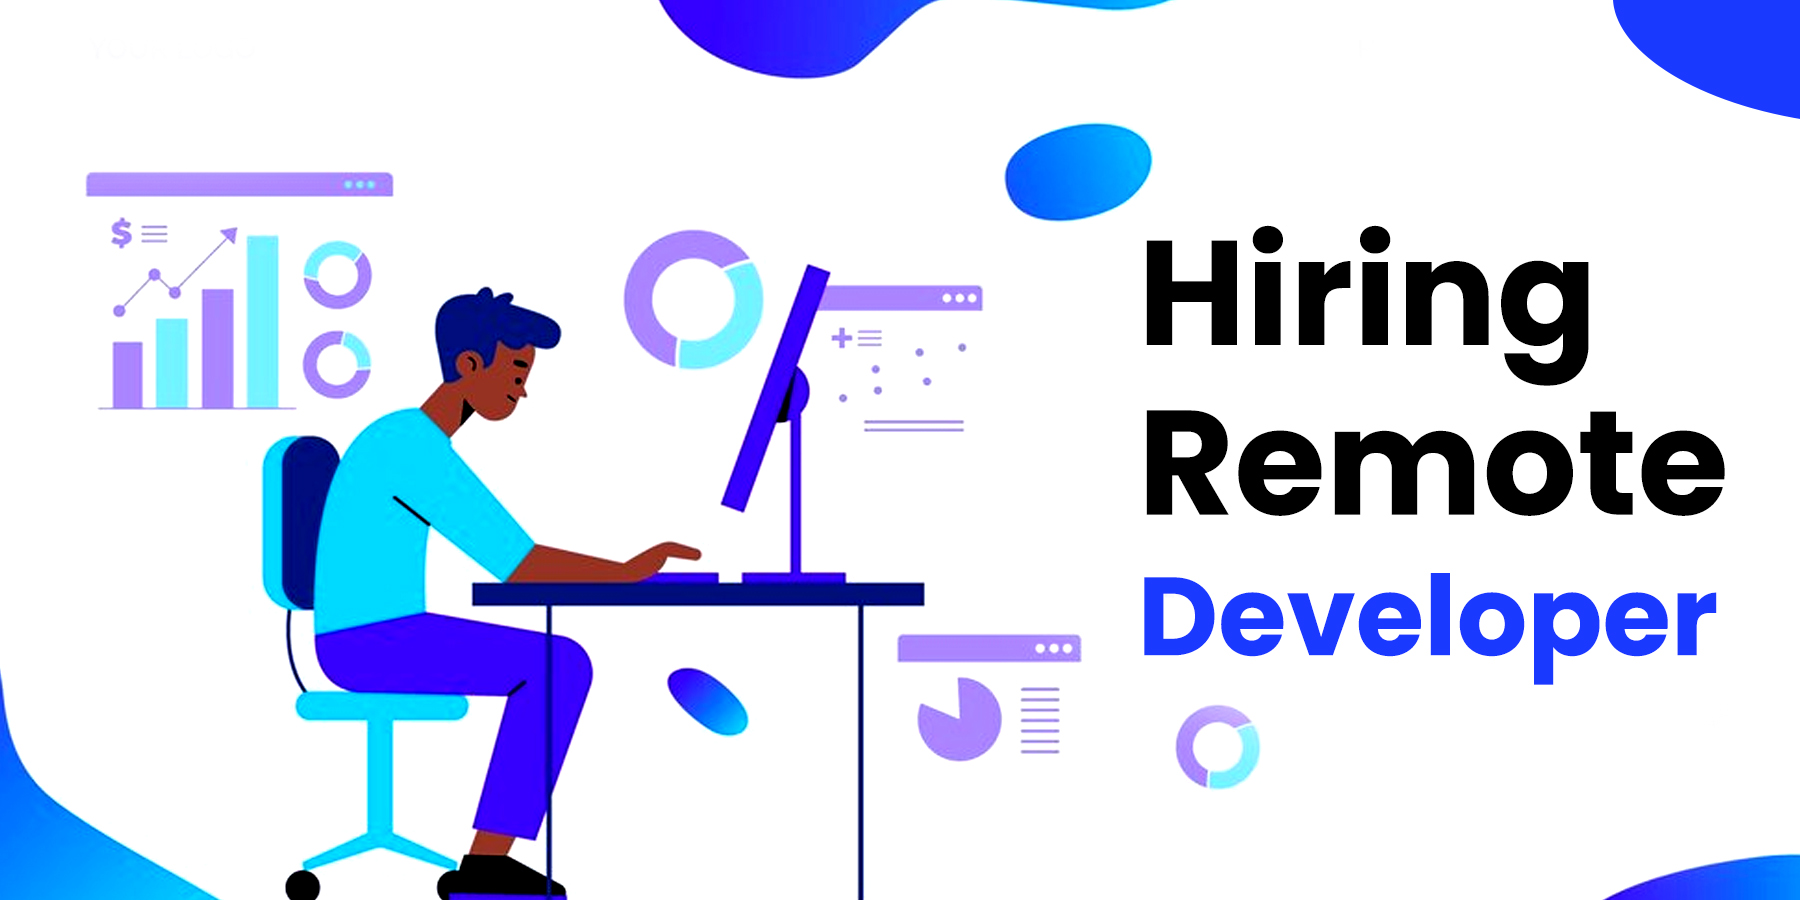 Hiring a Remote Developer: 3 Types of Assessment You Should Give to Your Applicant